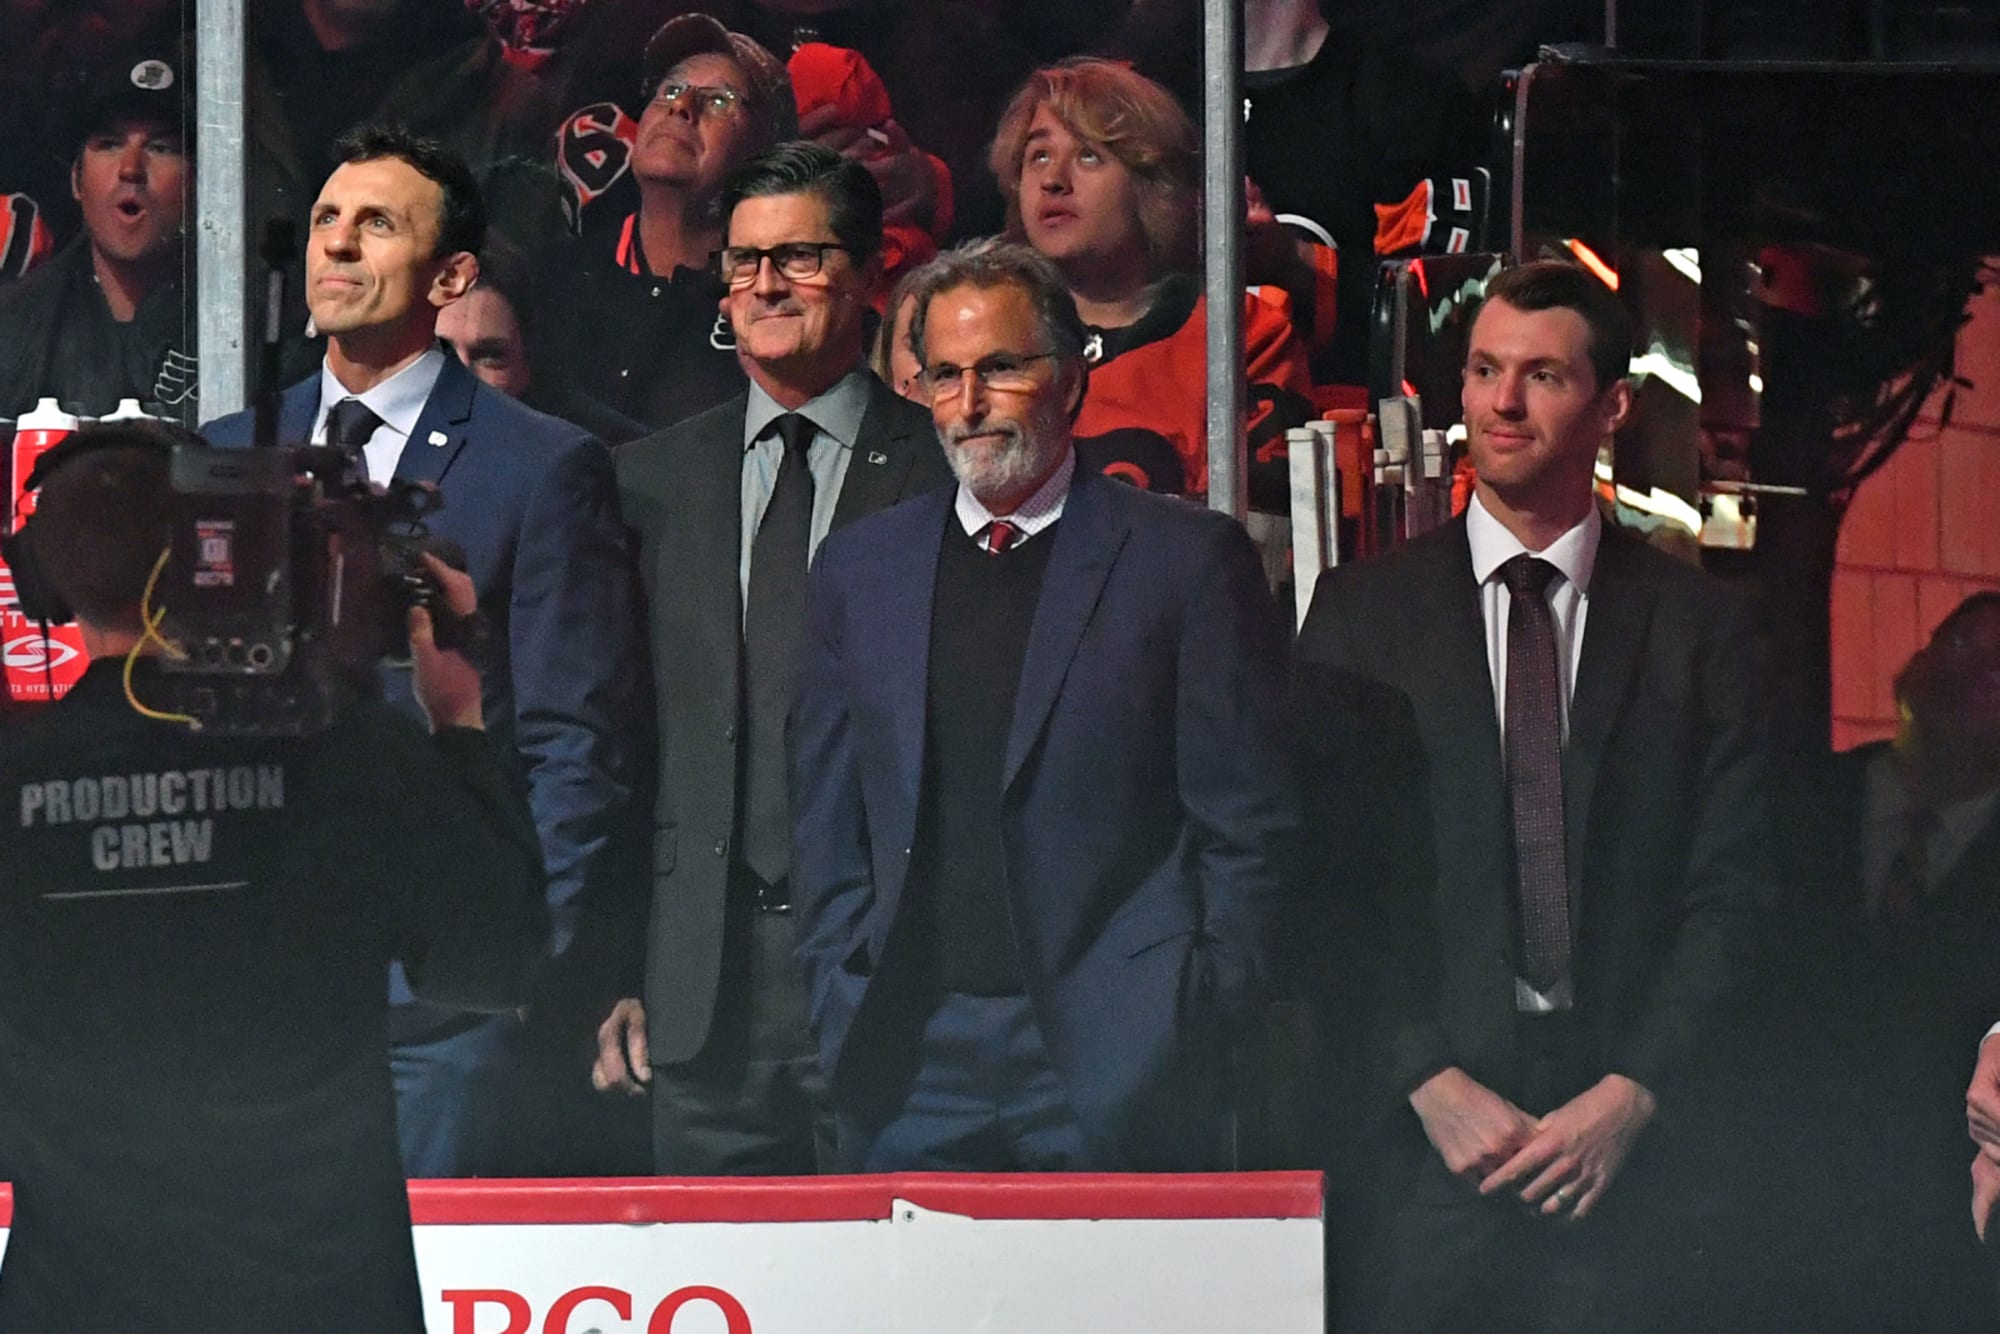 A 2022 year in review for the Philadelphia Flyers